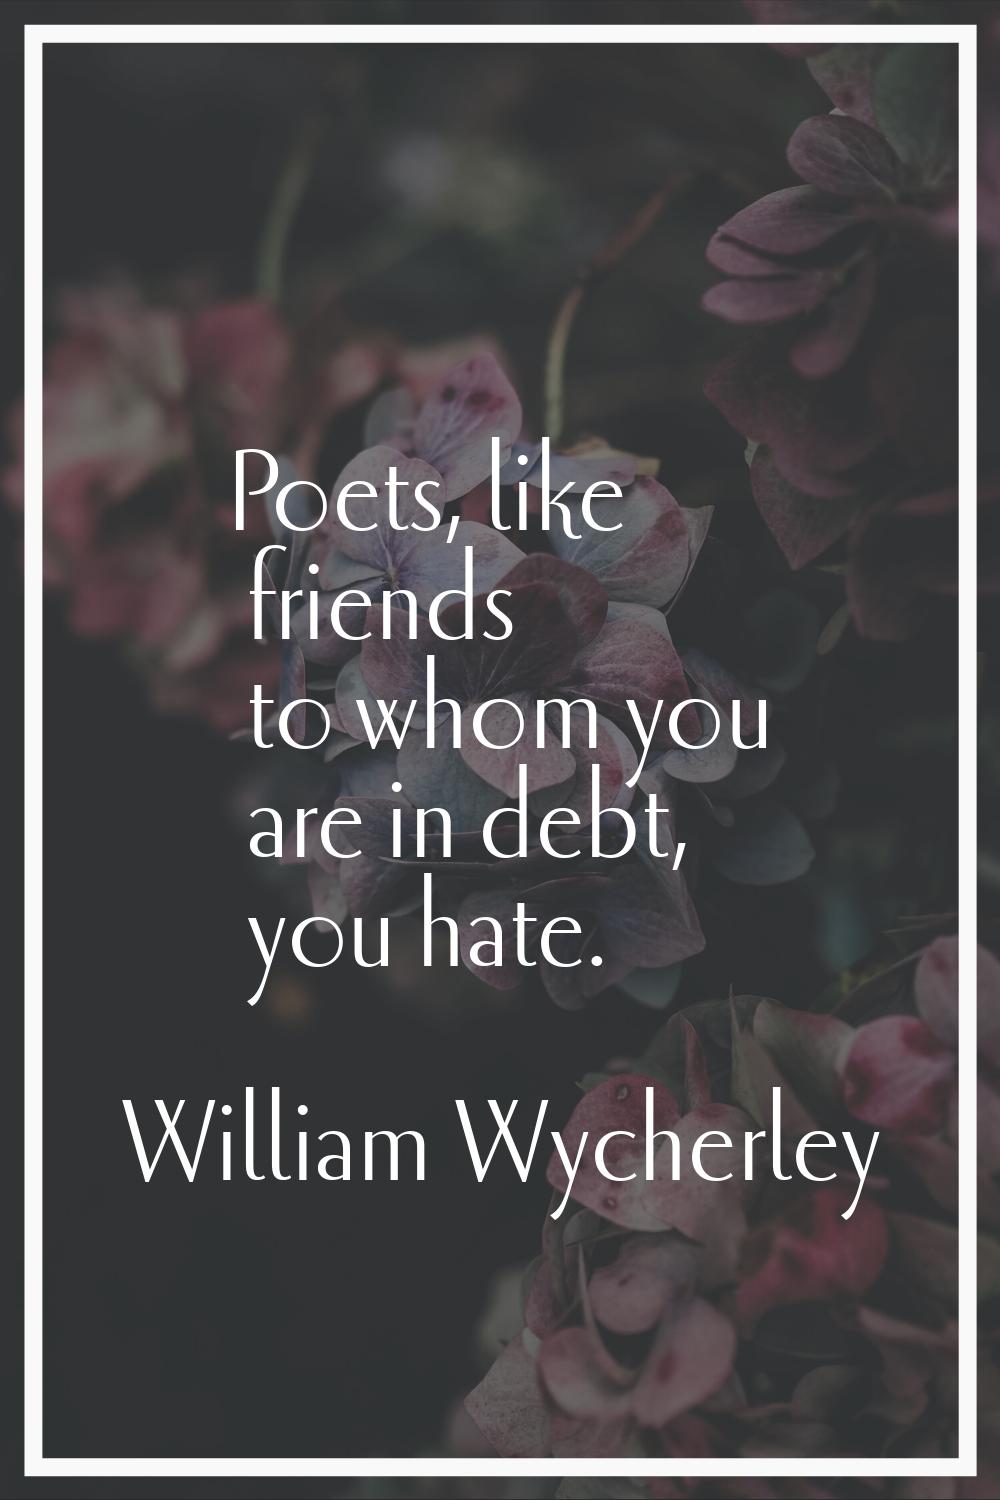 Poets, like friends to whom you are in debt, you hate.